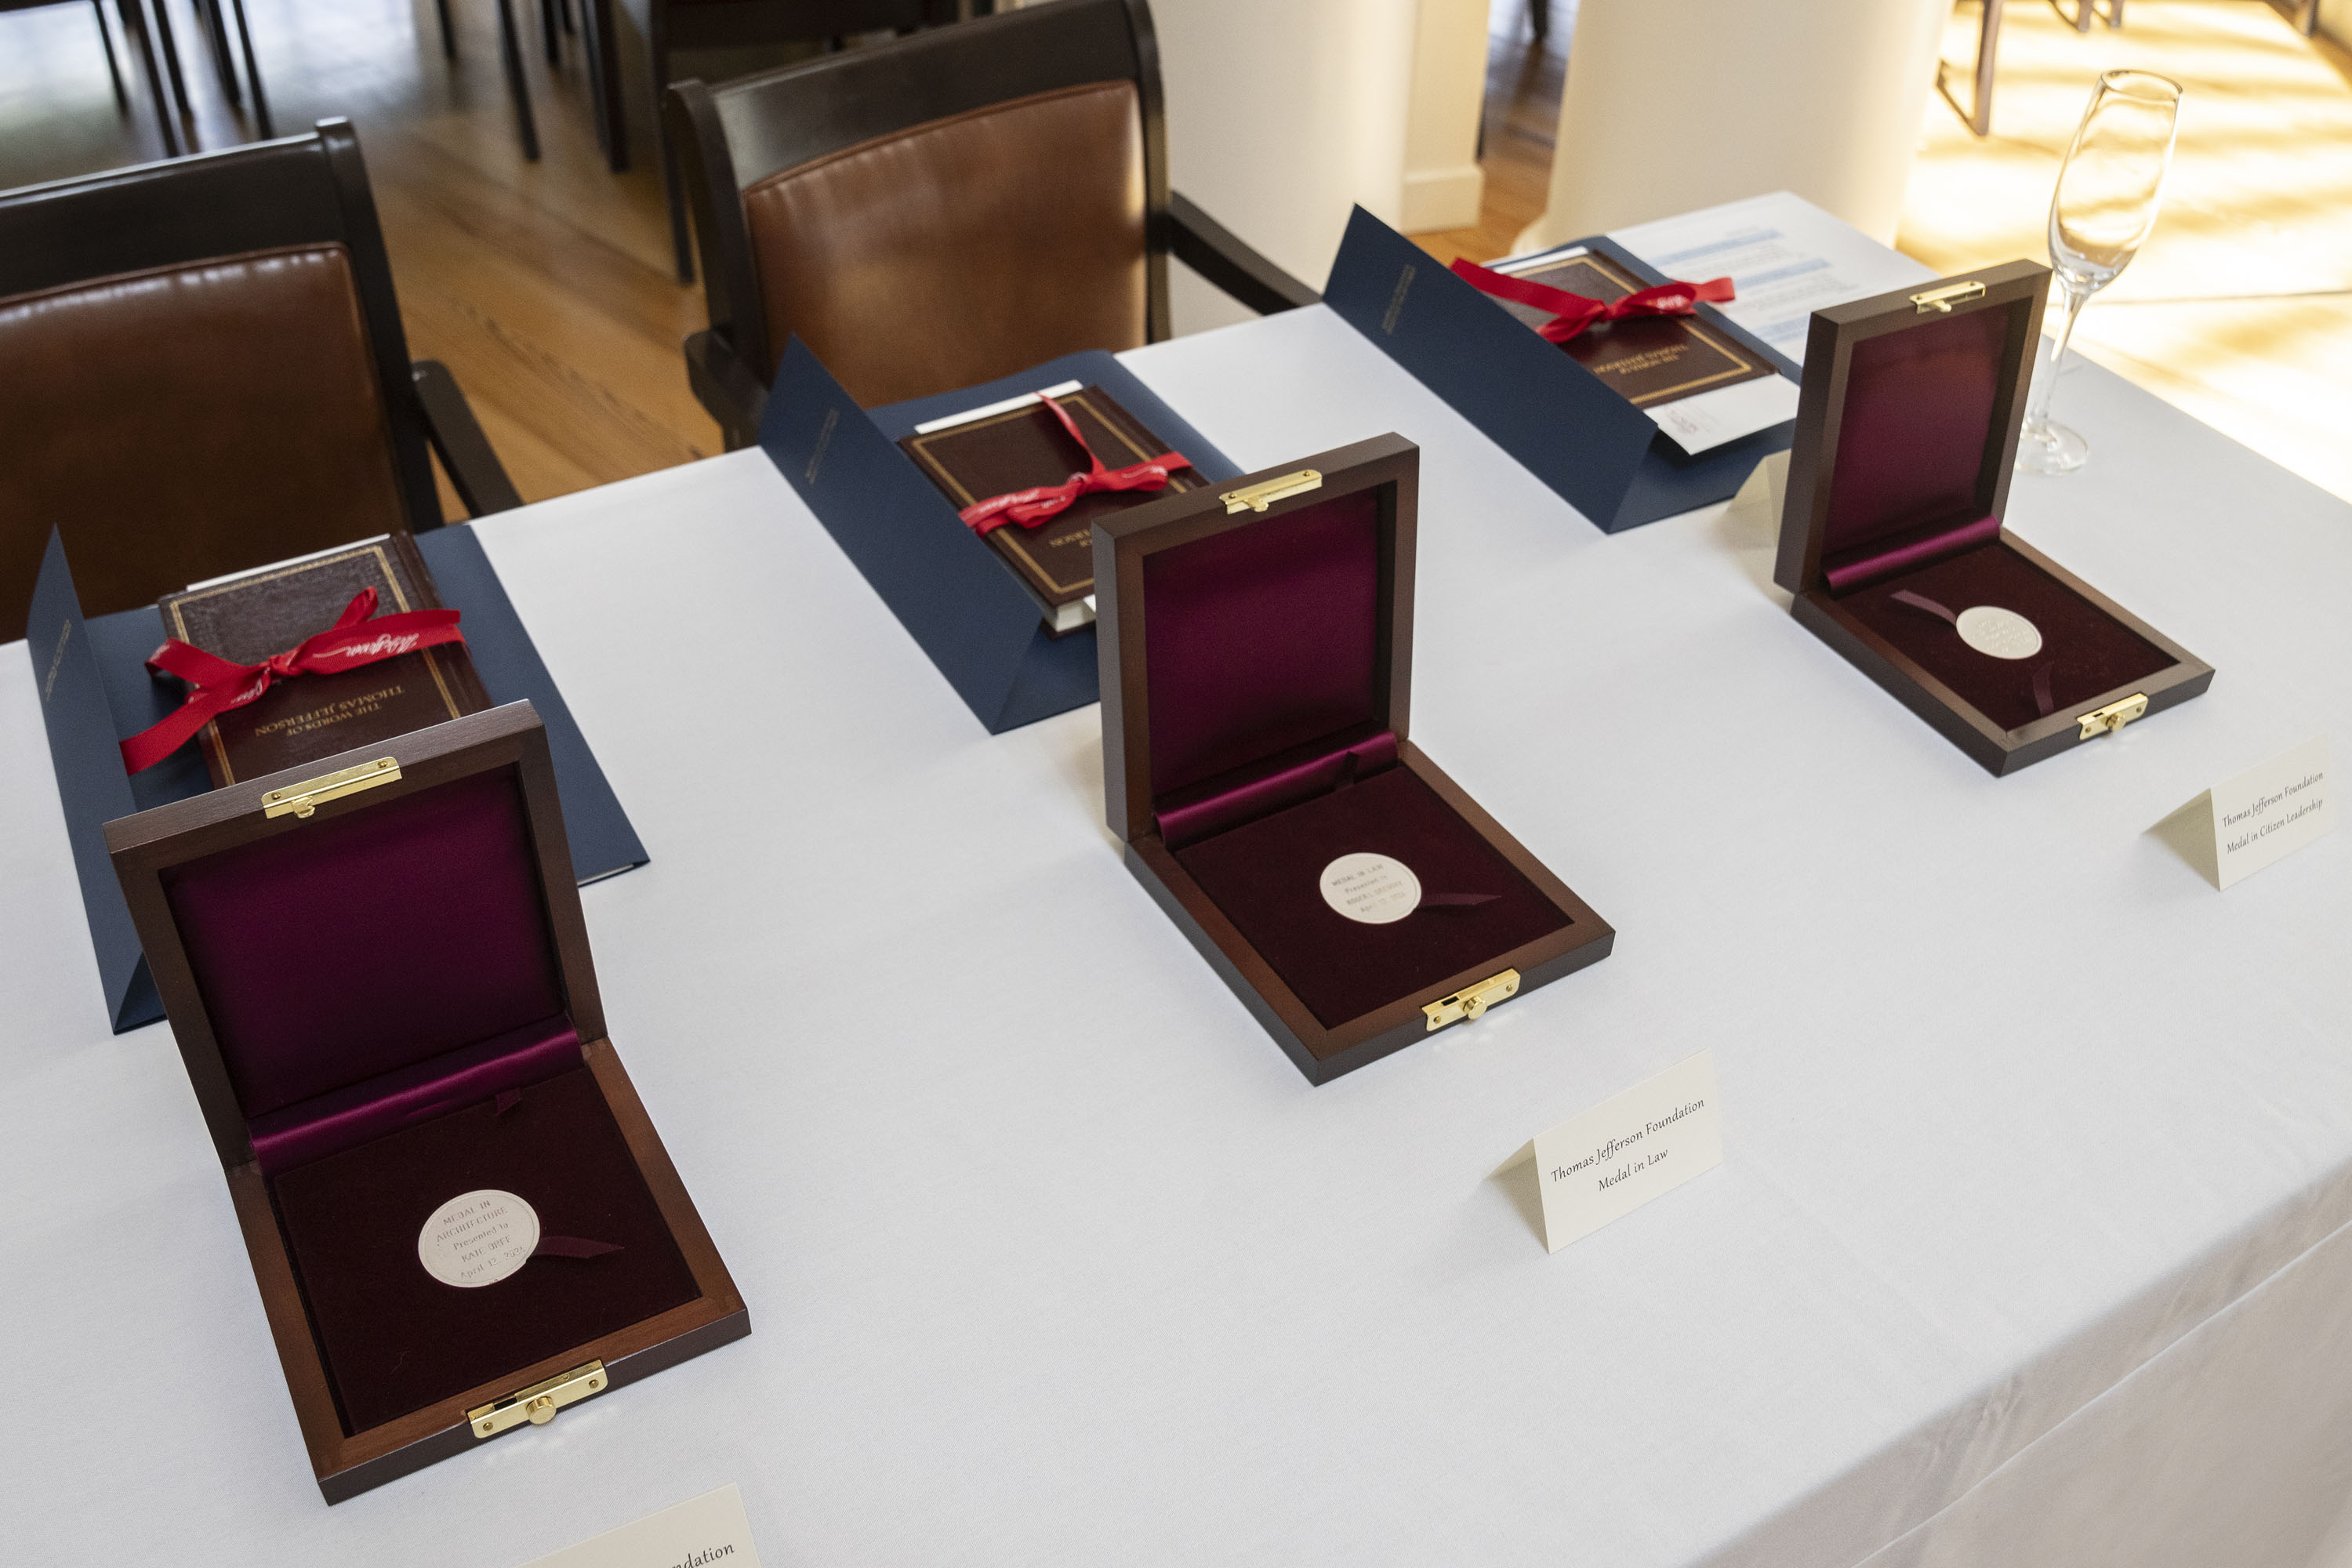 A row of Founders medals